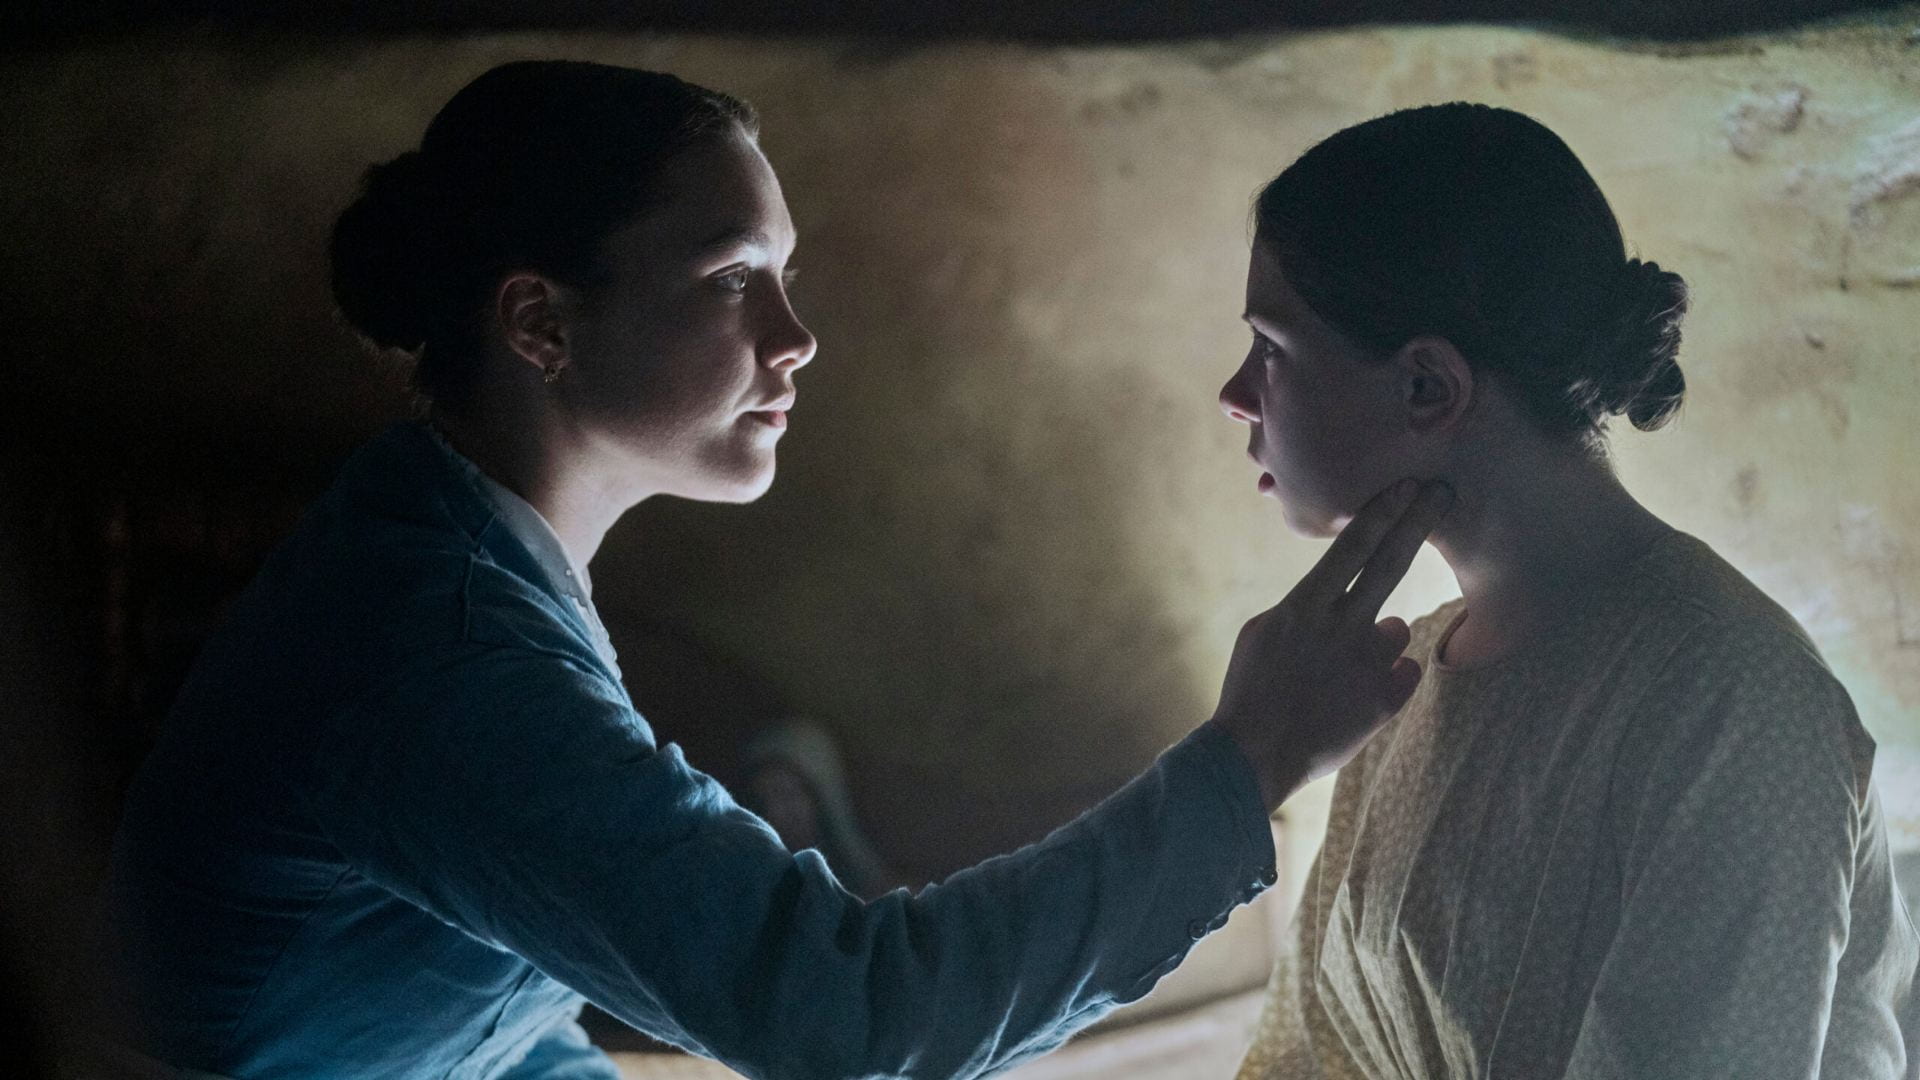 Florence Pugh and a young girl look at each other in a shadowy room